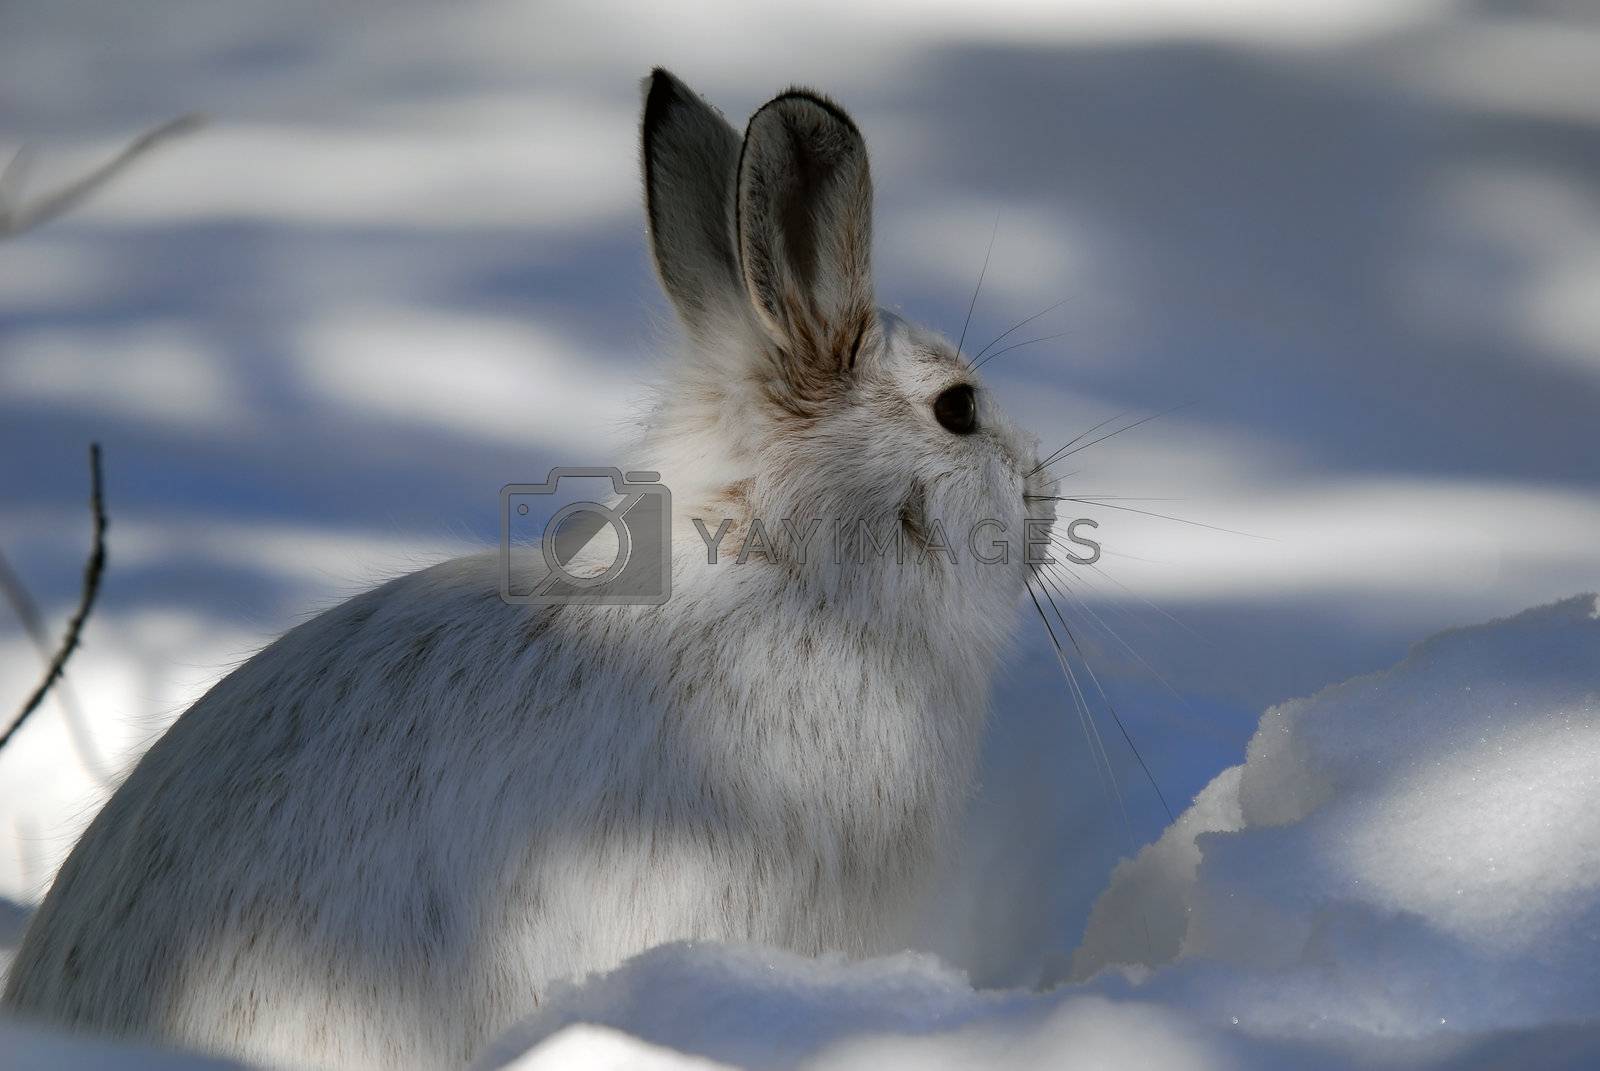 Royalty free image of Snowshoe Hare by nialat